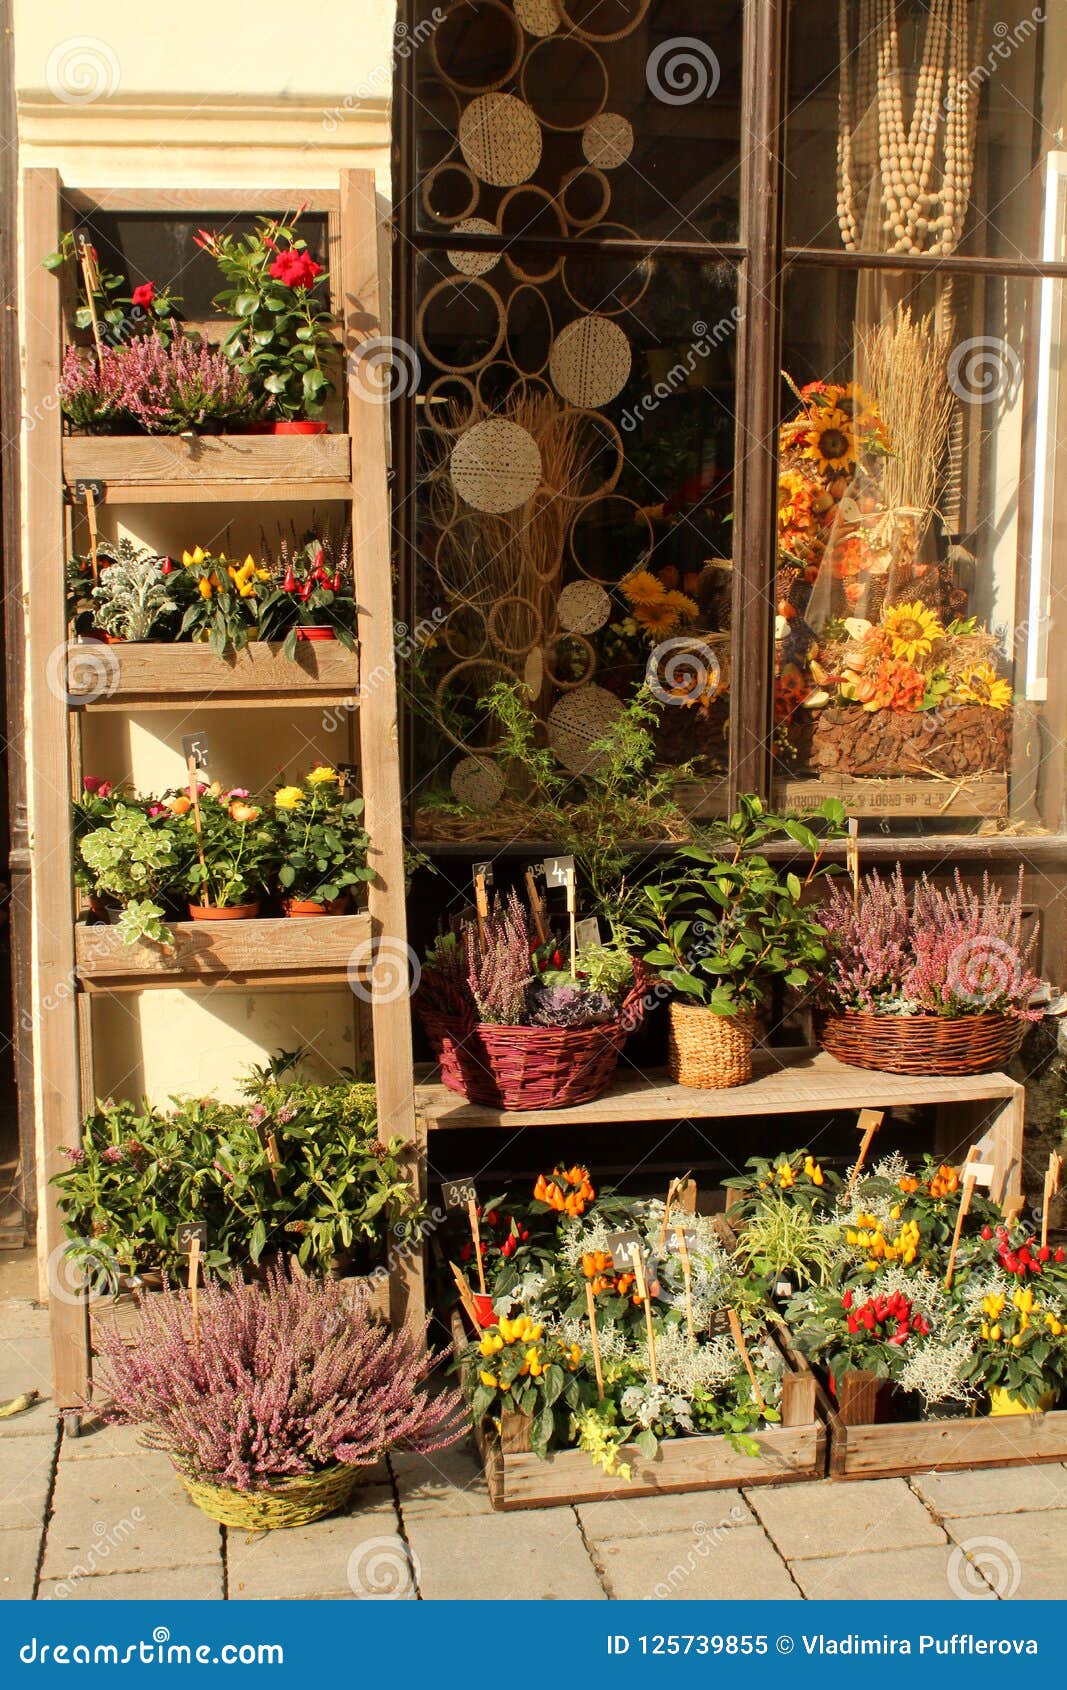 city life - decoration in front of floristÃÂ´s